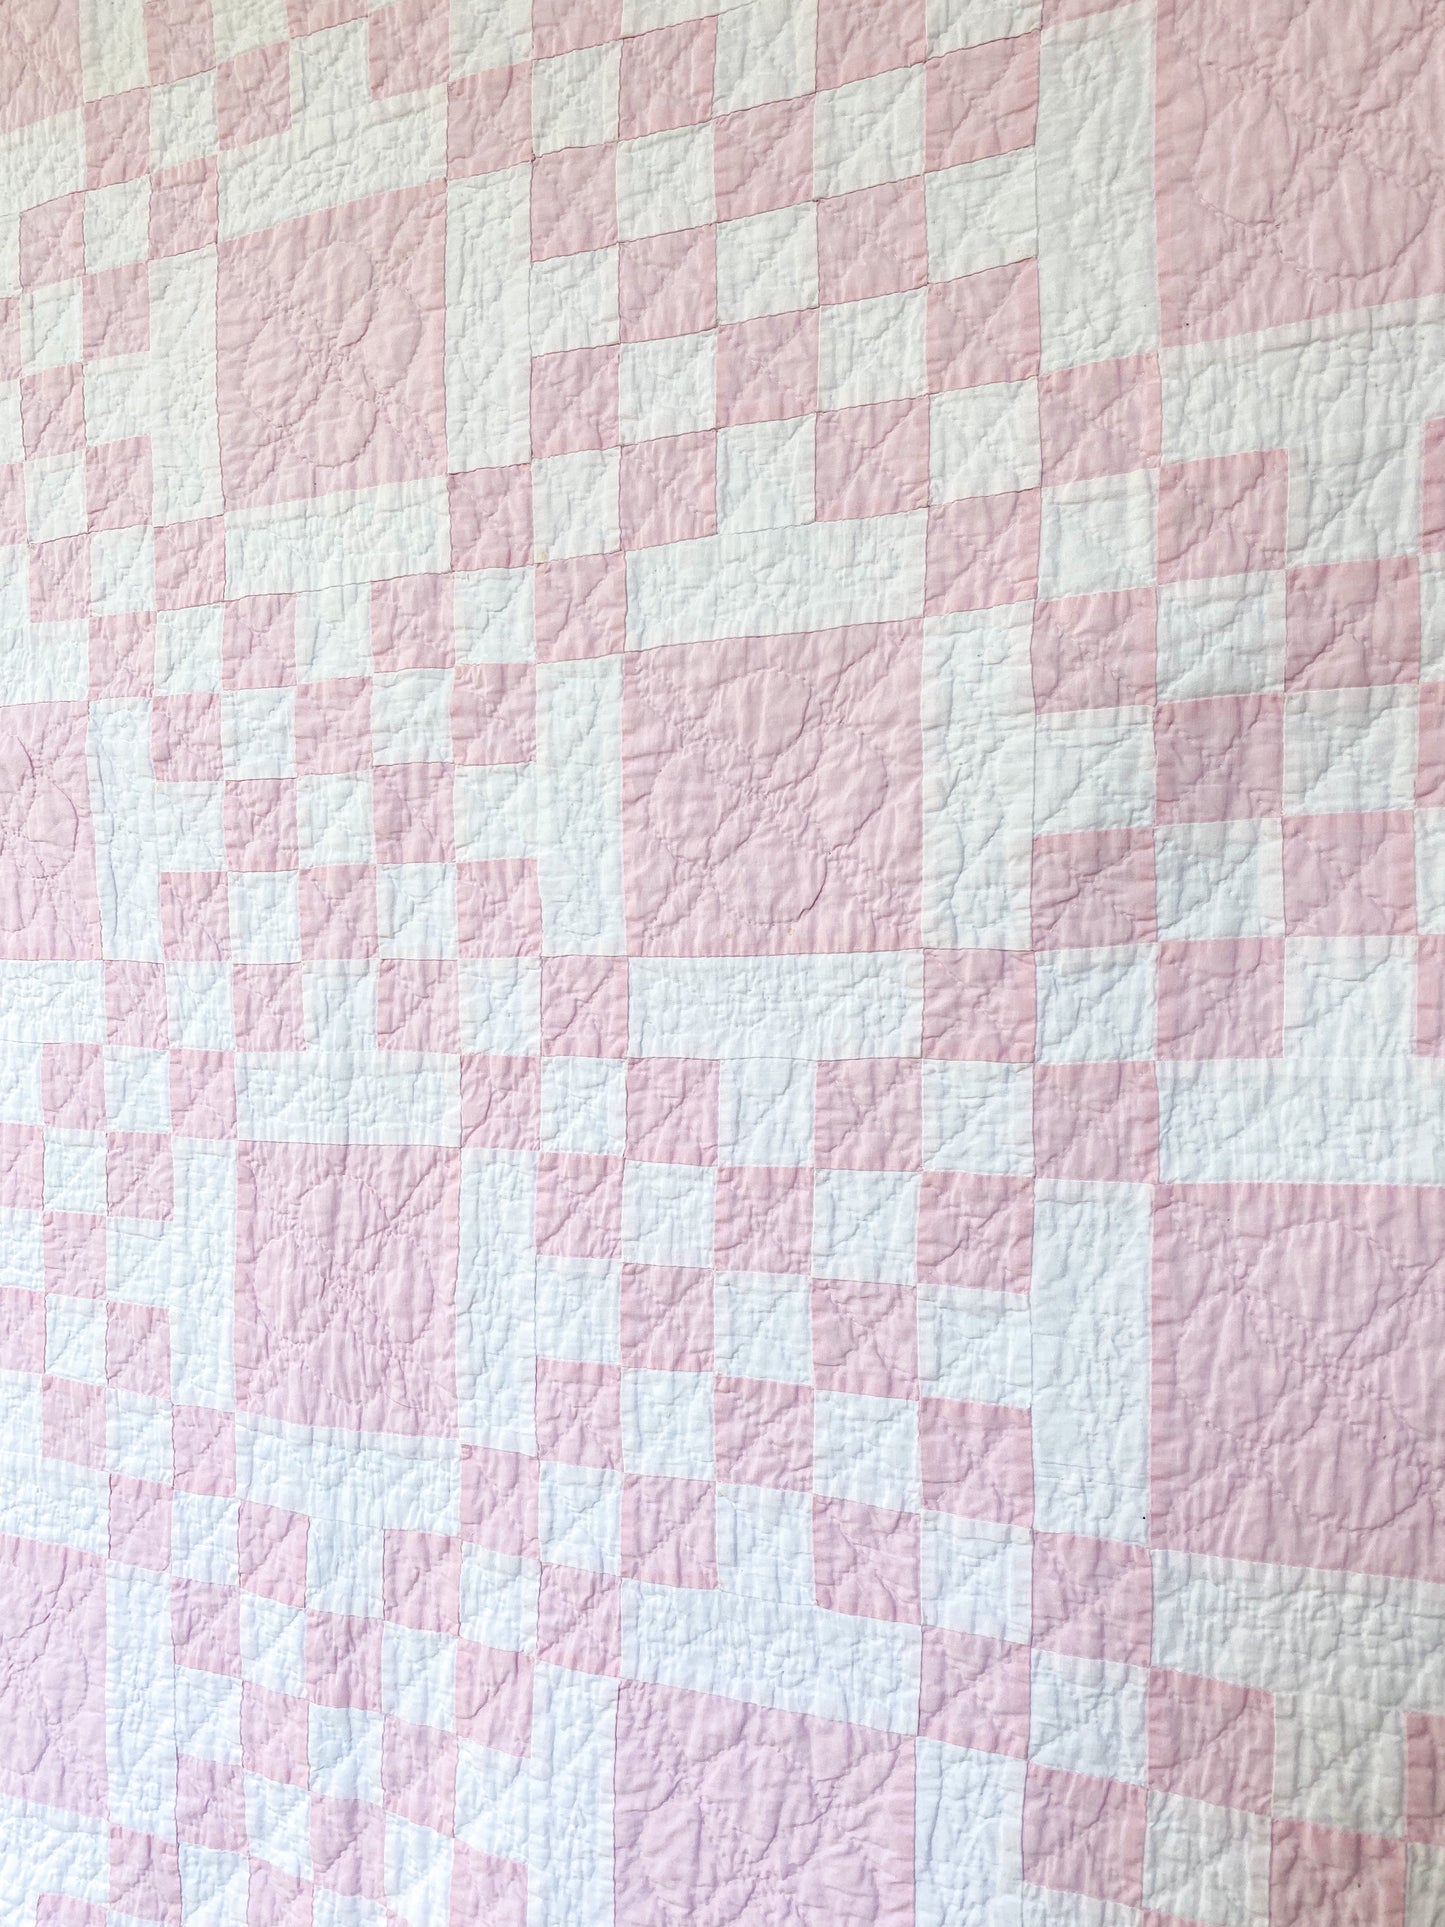 Vintage Pair of Matching Pink and White Double Irish Chain Twin Quilts, 81" x 58"